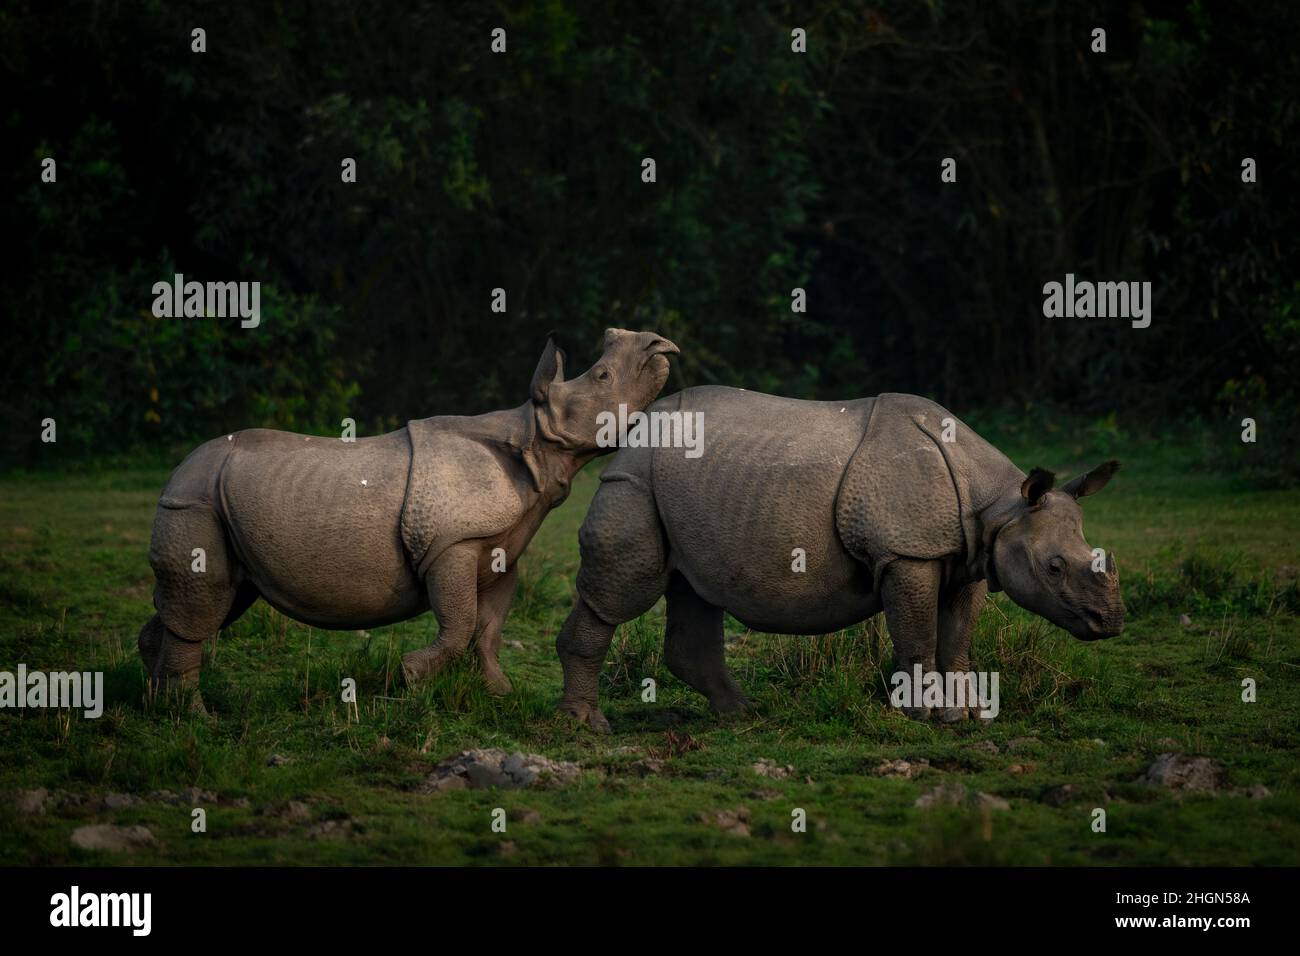 A rhino calf plays with its mother during late evening hours at Kaziranga National Park, Assam, India Stock Photo